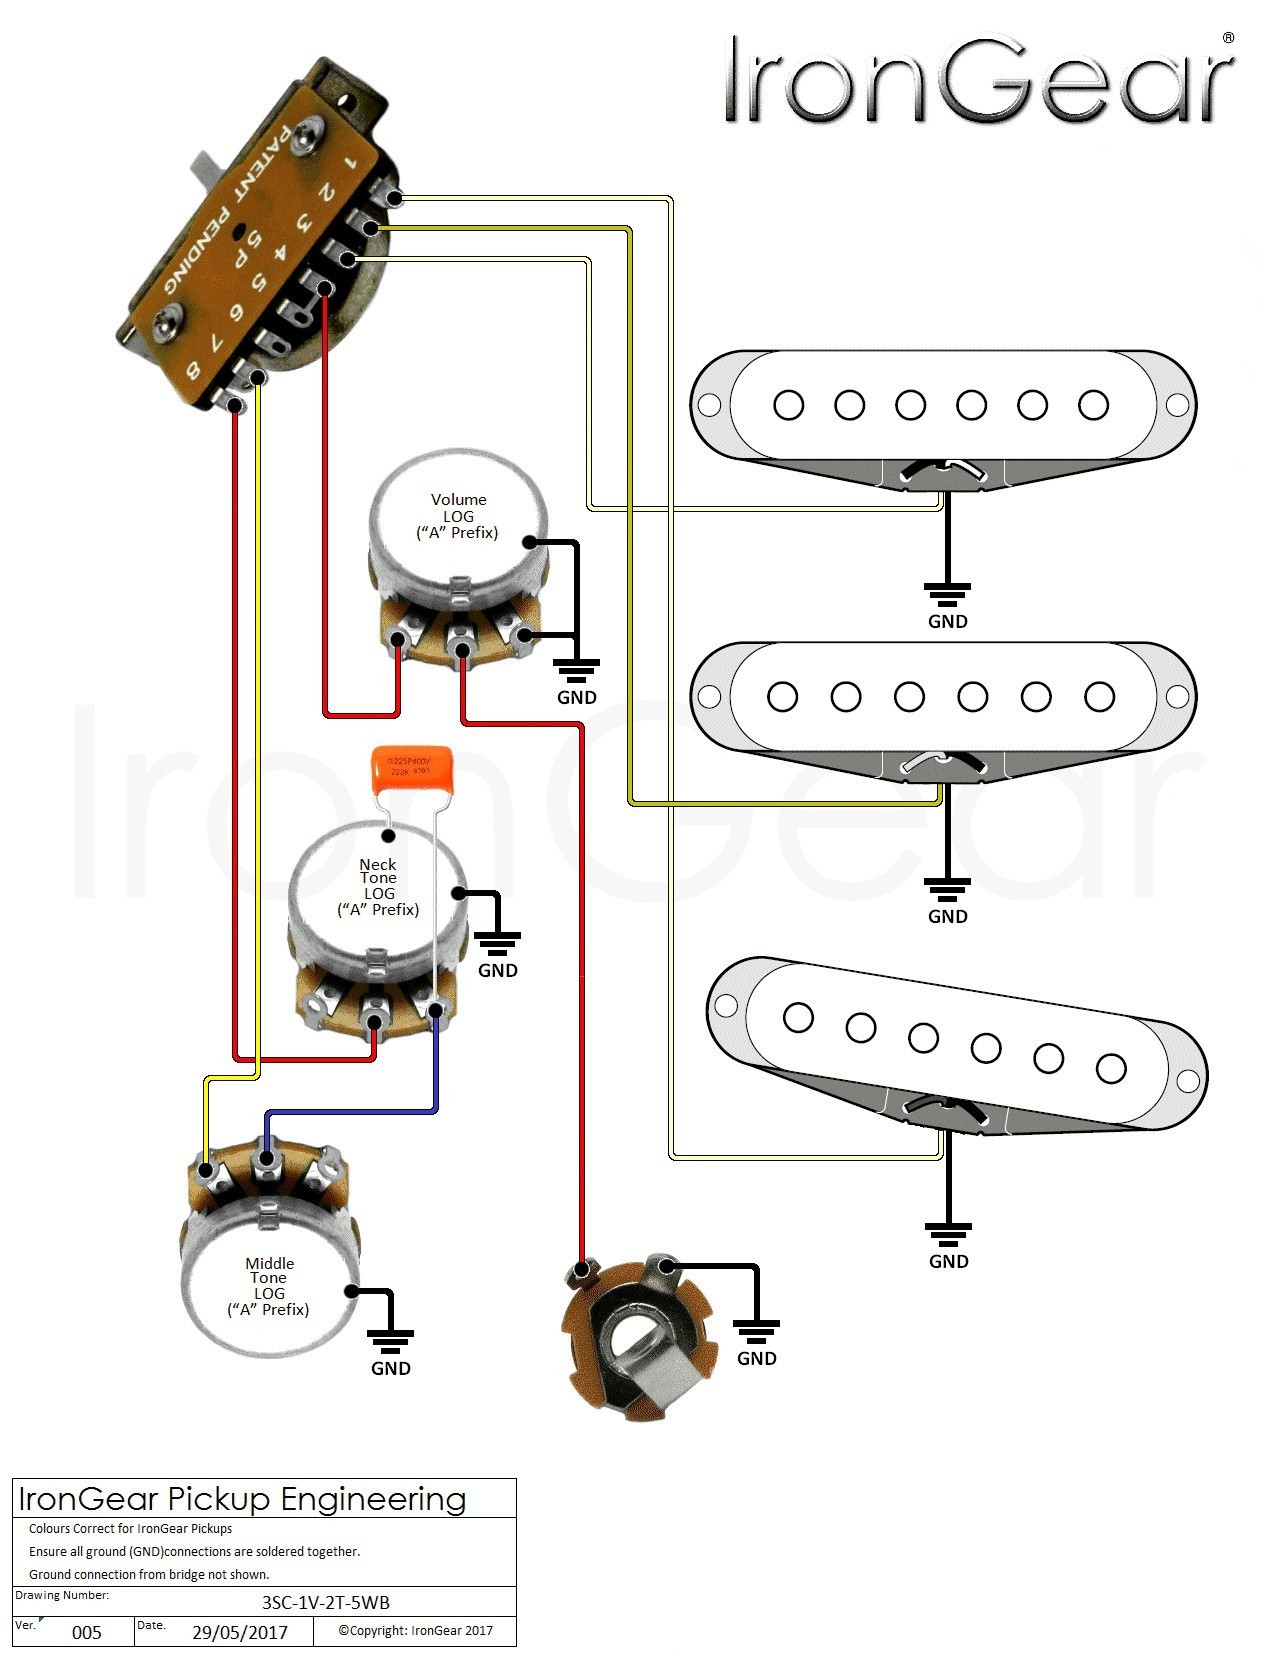 Wiring Diagram for Fender Stratocaster 5 Way Switch Fresh Wiring Diagram for Fender Stratocaster 5 Way